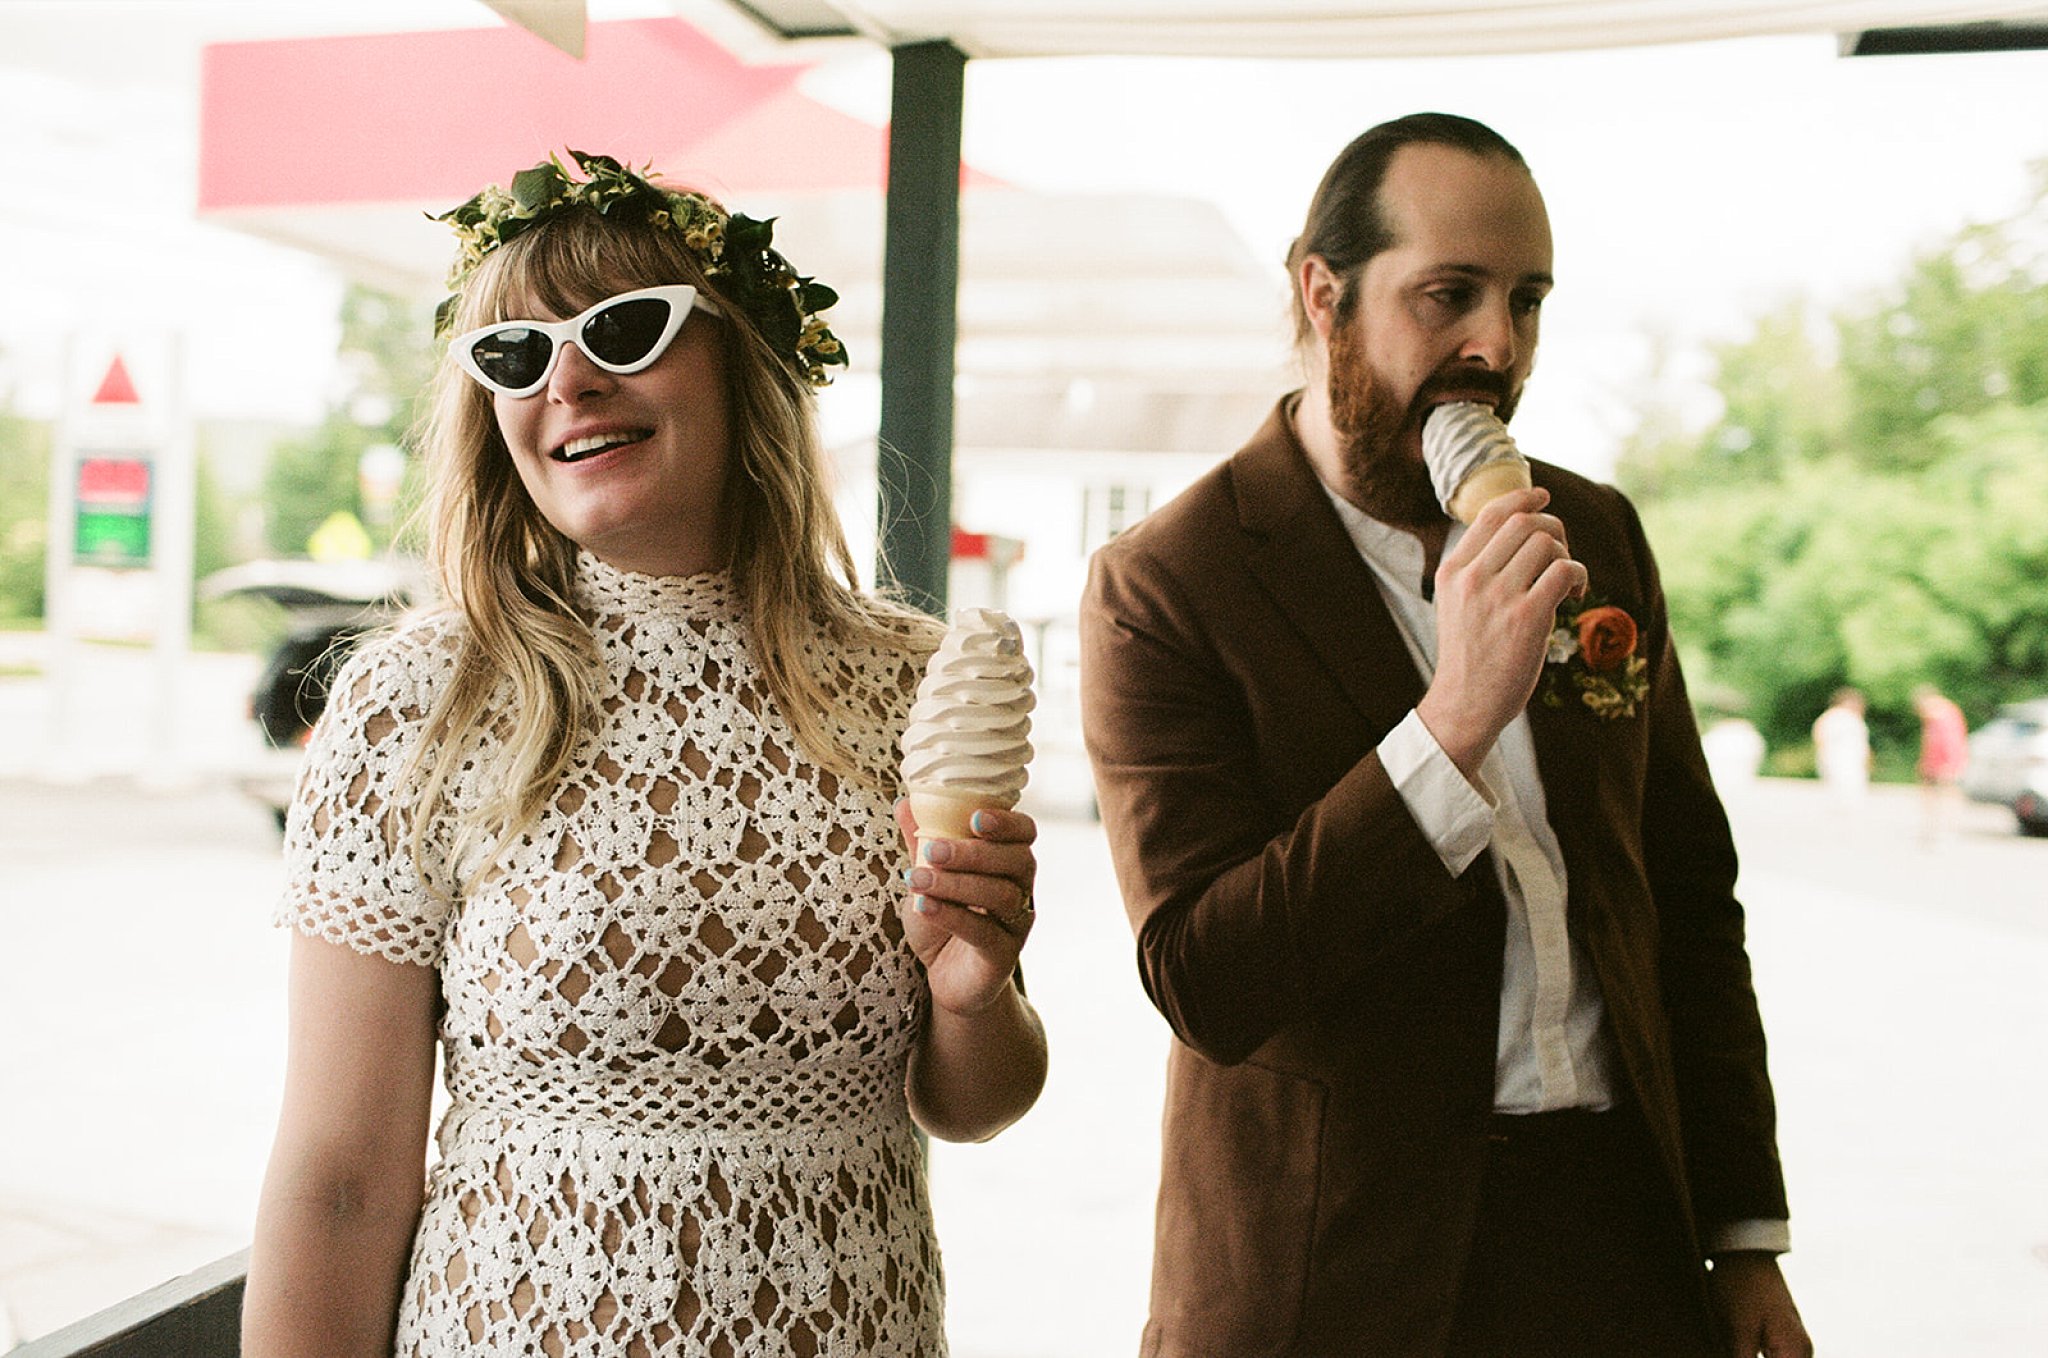 Bride and groom enjoy soft serve ice cream in wafer cones together, she smiles while he goes in for a bite.